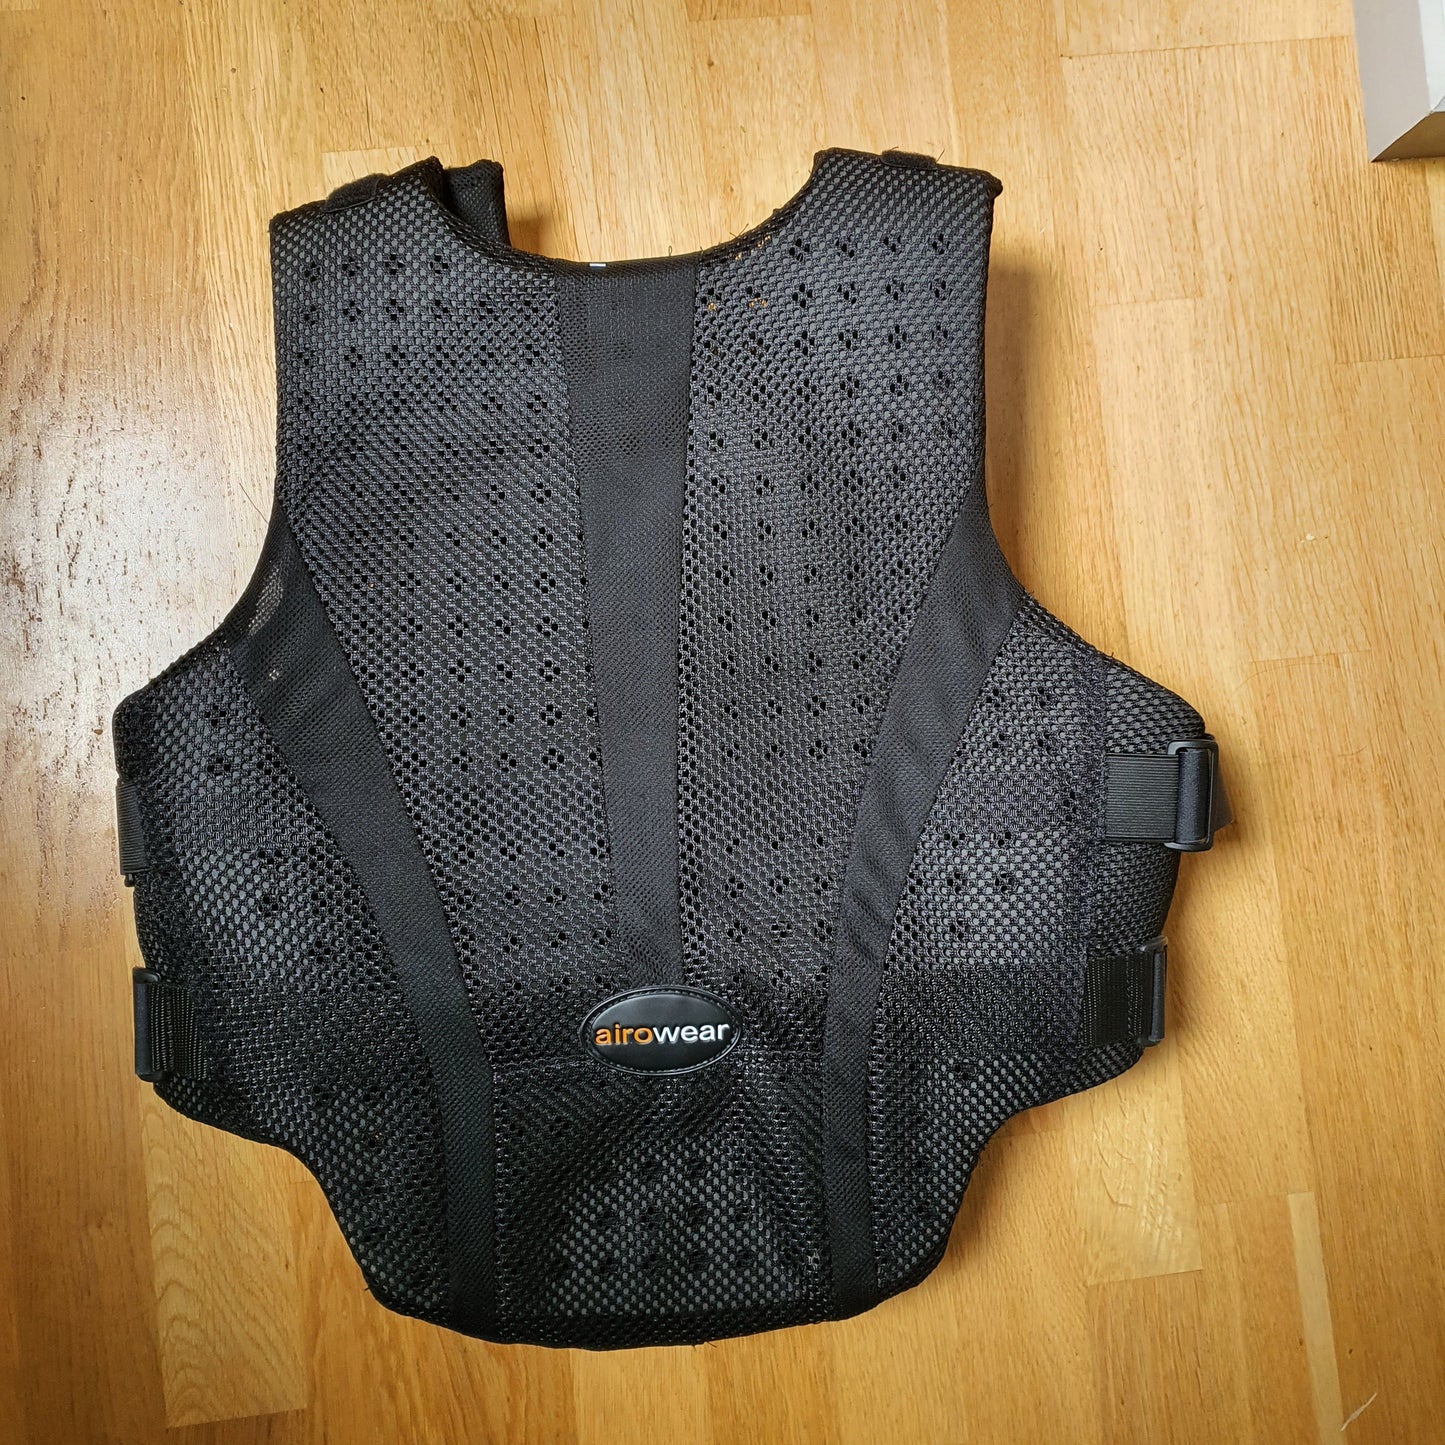 Airowear Outlyne Air mesh body protector (Ladies sizes) - Robyn's Tack Room 